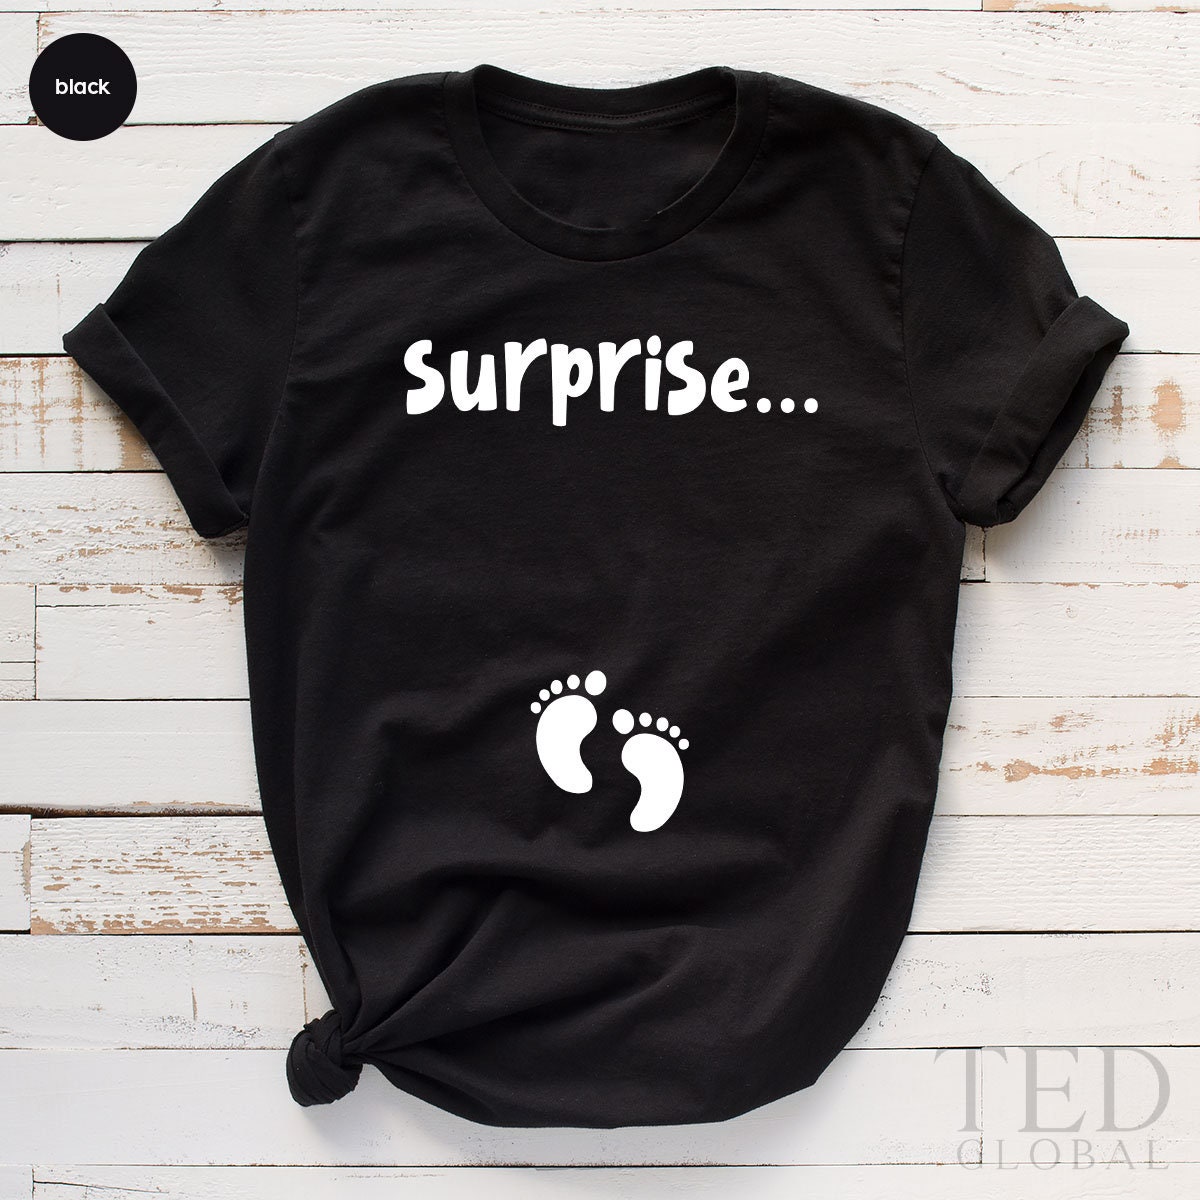 funny expecting shirts - funny pregnancy shirts - funny announcement shirts  - funny couples shirts - we're pregnant shirts - pregnancy shirt